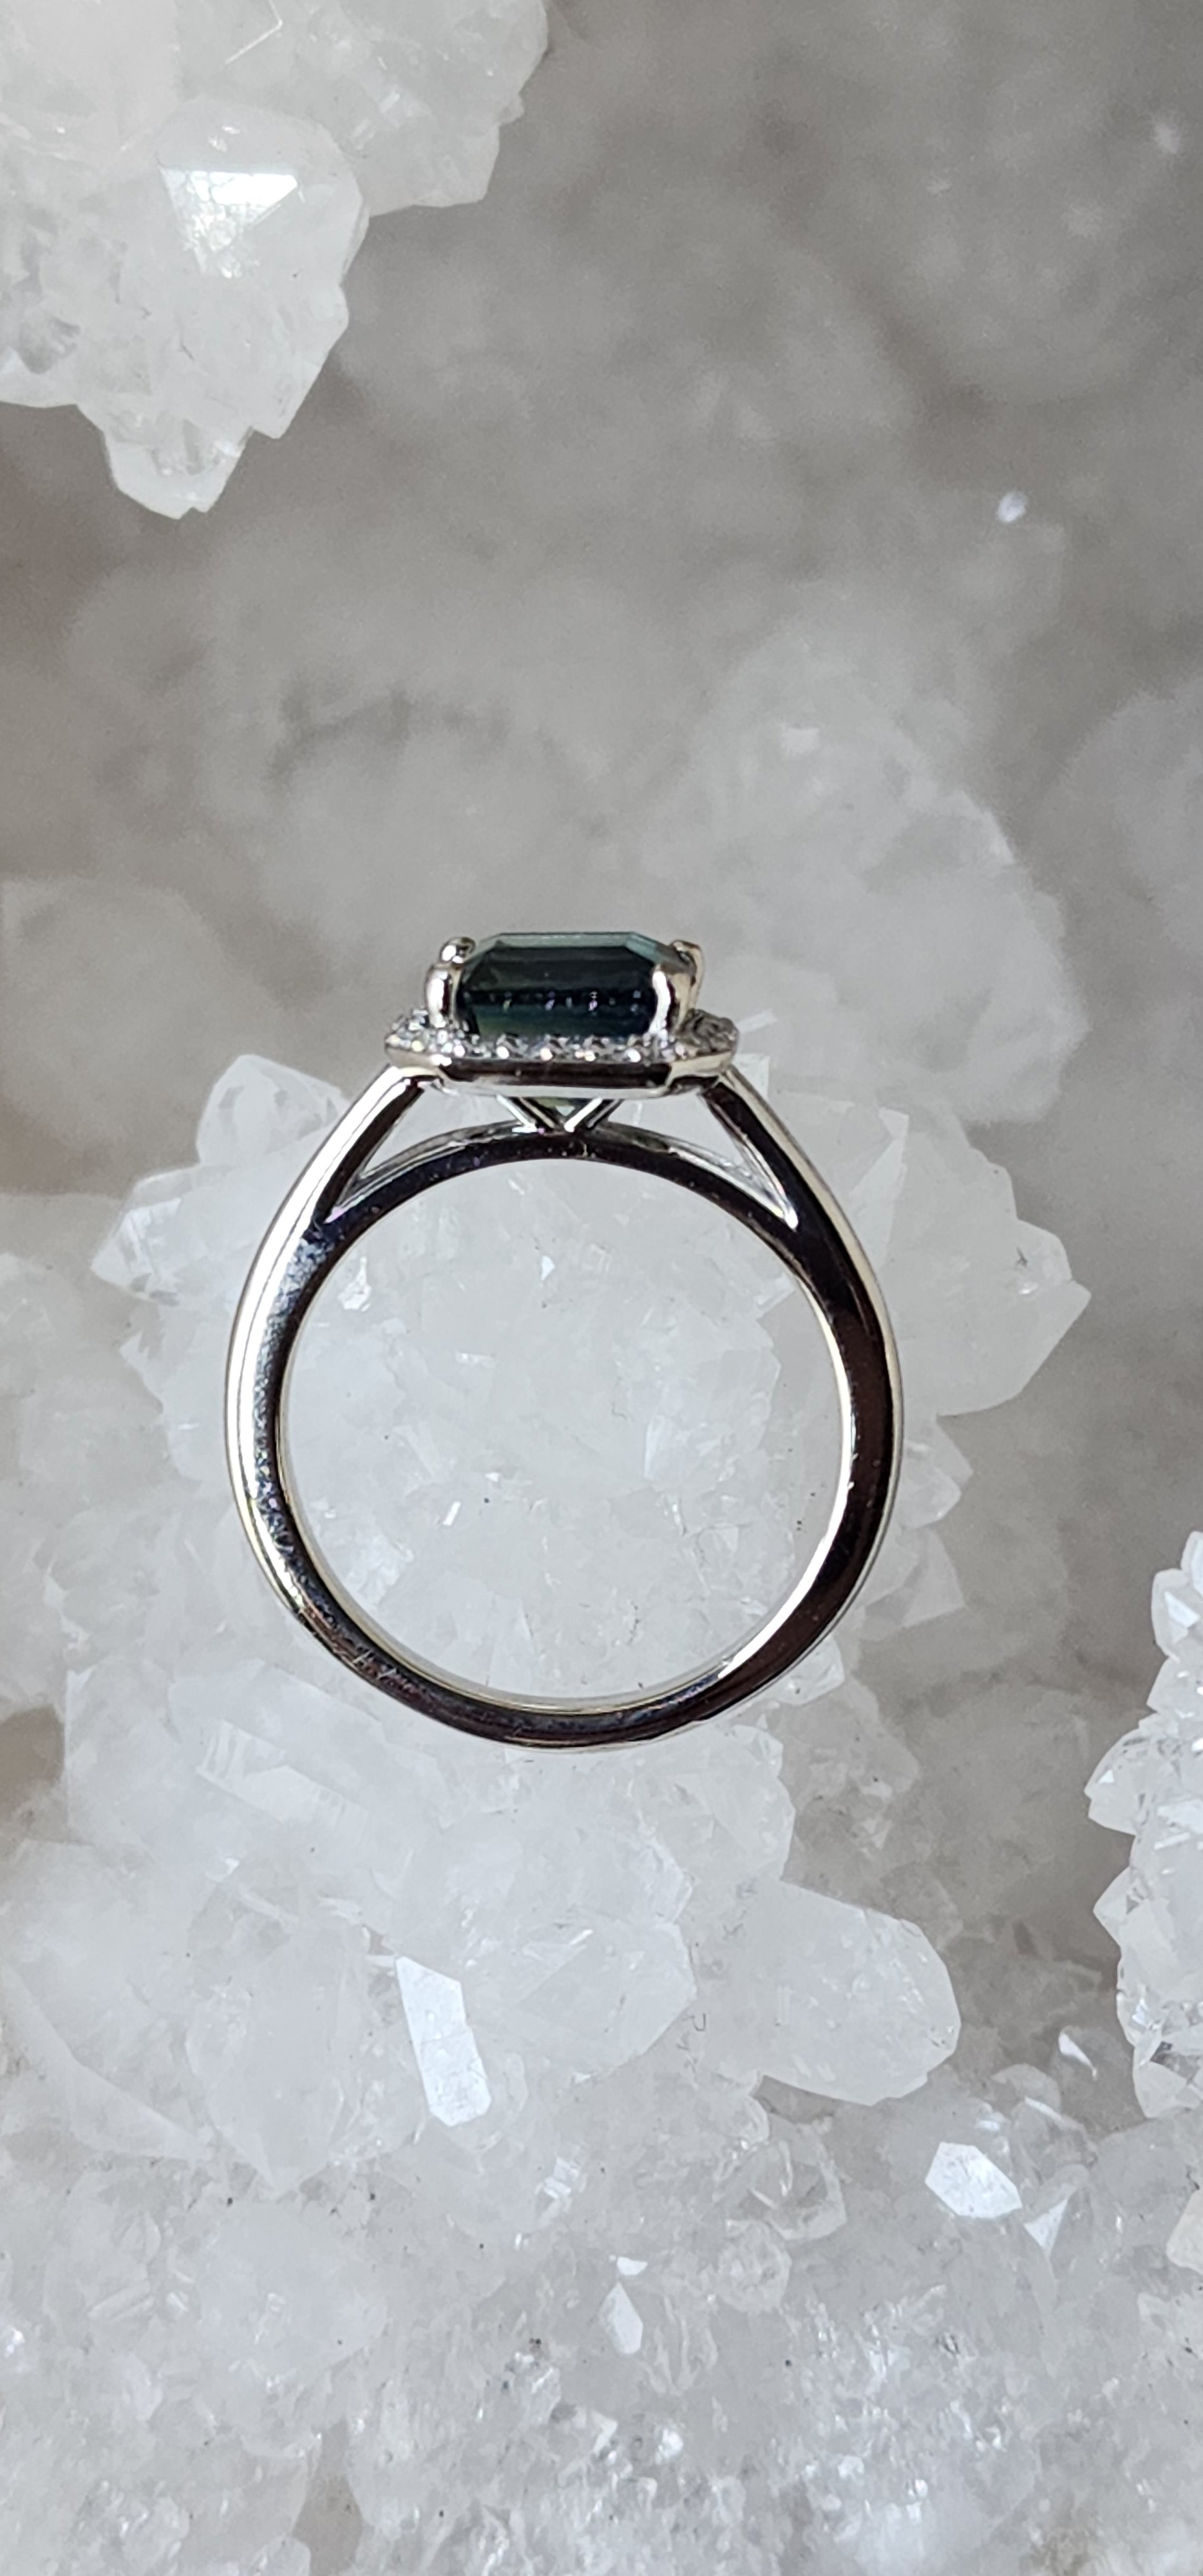 Ring - 2.32 CT Madagascar Sapphire - Parti Colored Emerald Cut with a Diamond Halo in an East to West Setting